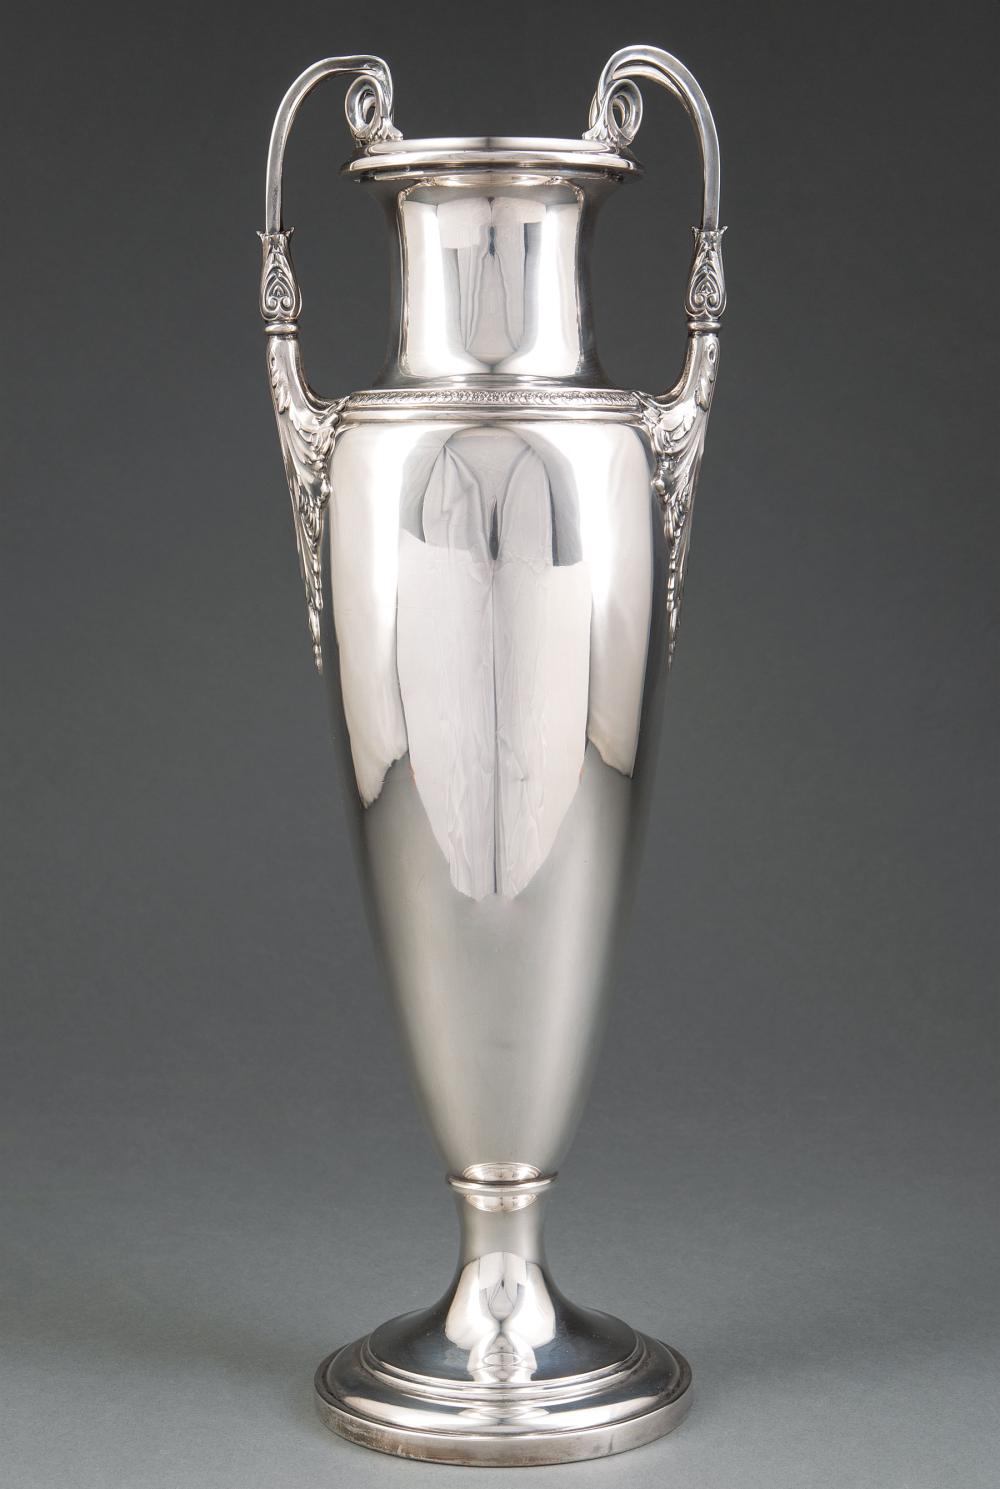 CHARTER CO STERLING SILVER AMPHORA 31a890